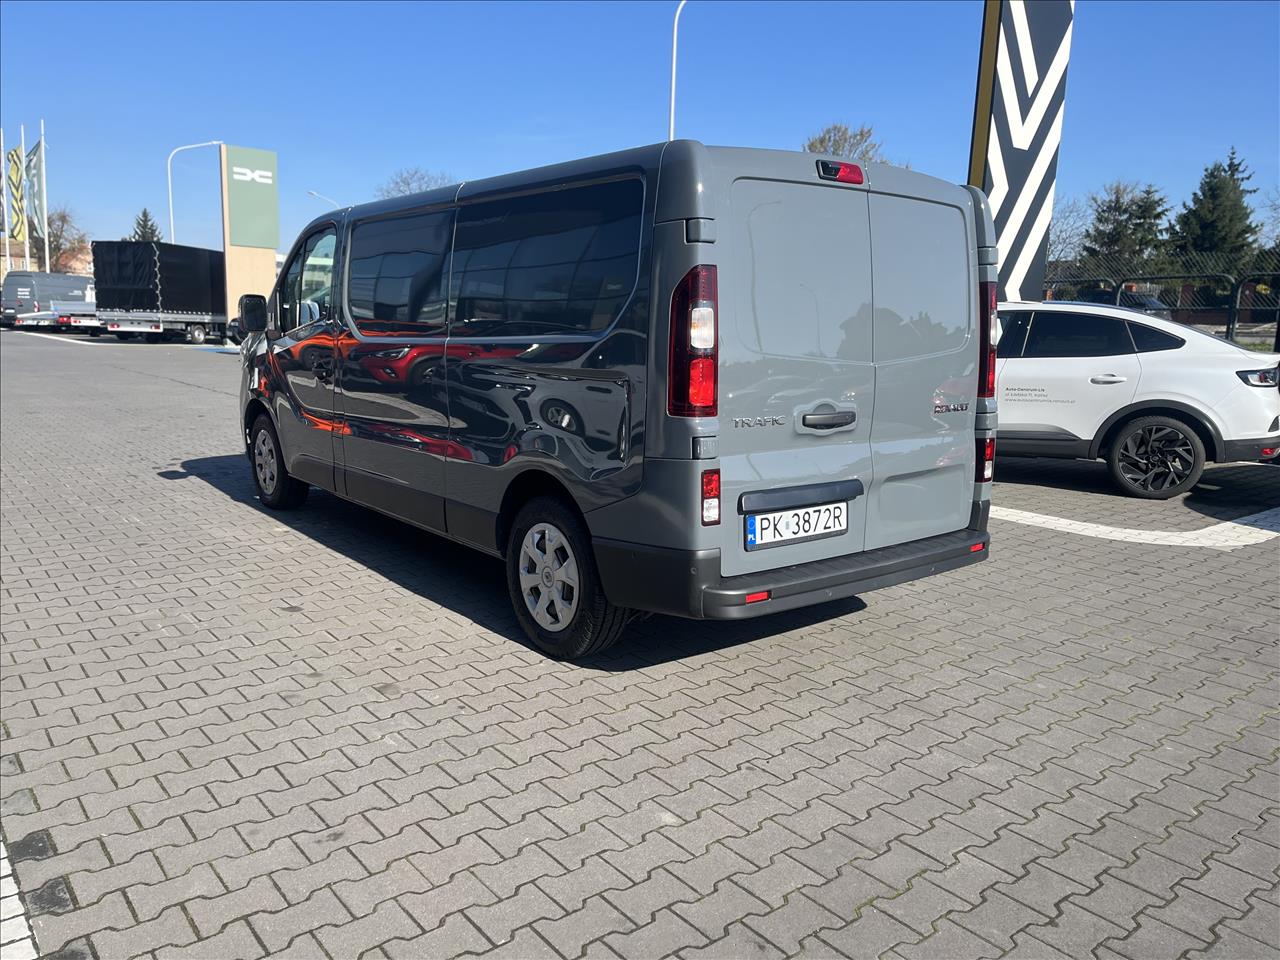 Renault TRAFIC Trafic 2.0 dCi L2H1 HD Extra 2023